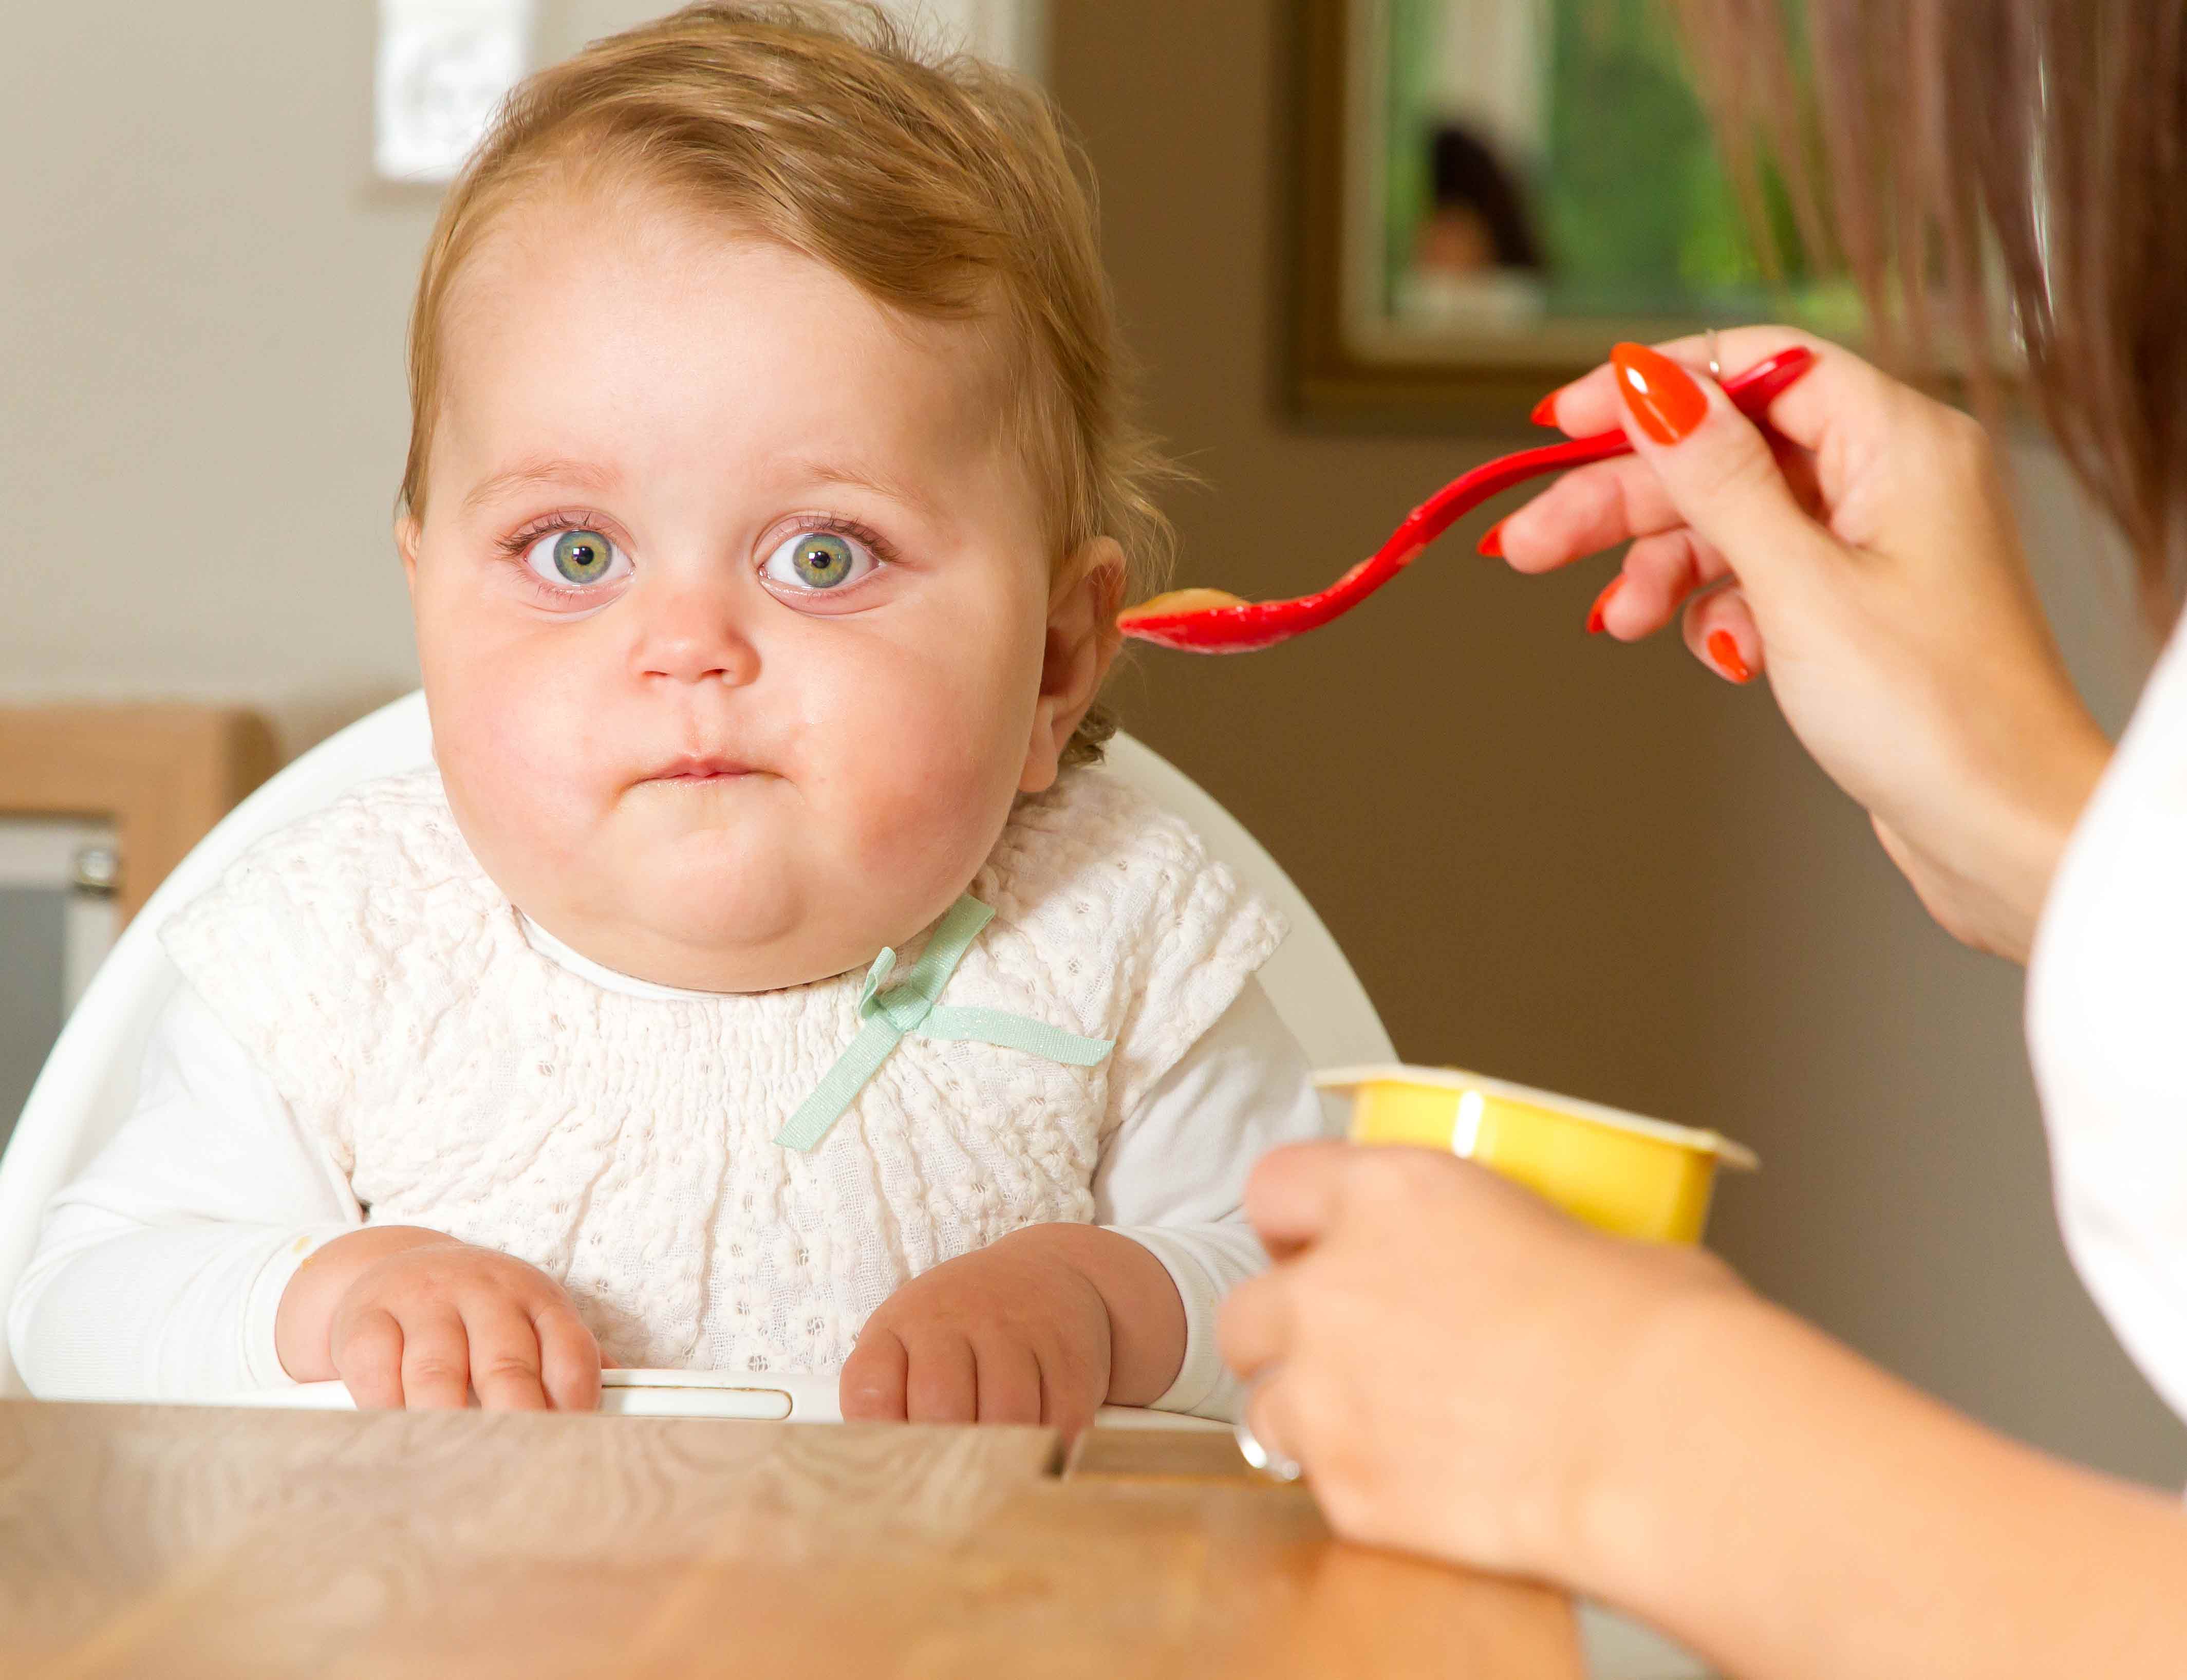 How to Handle Young Kids Who Overeat